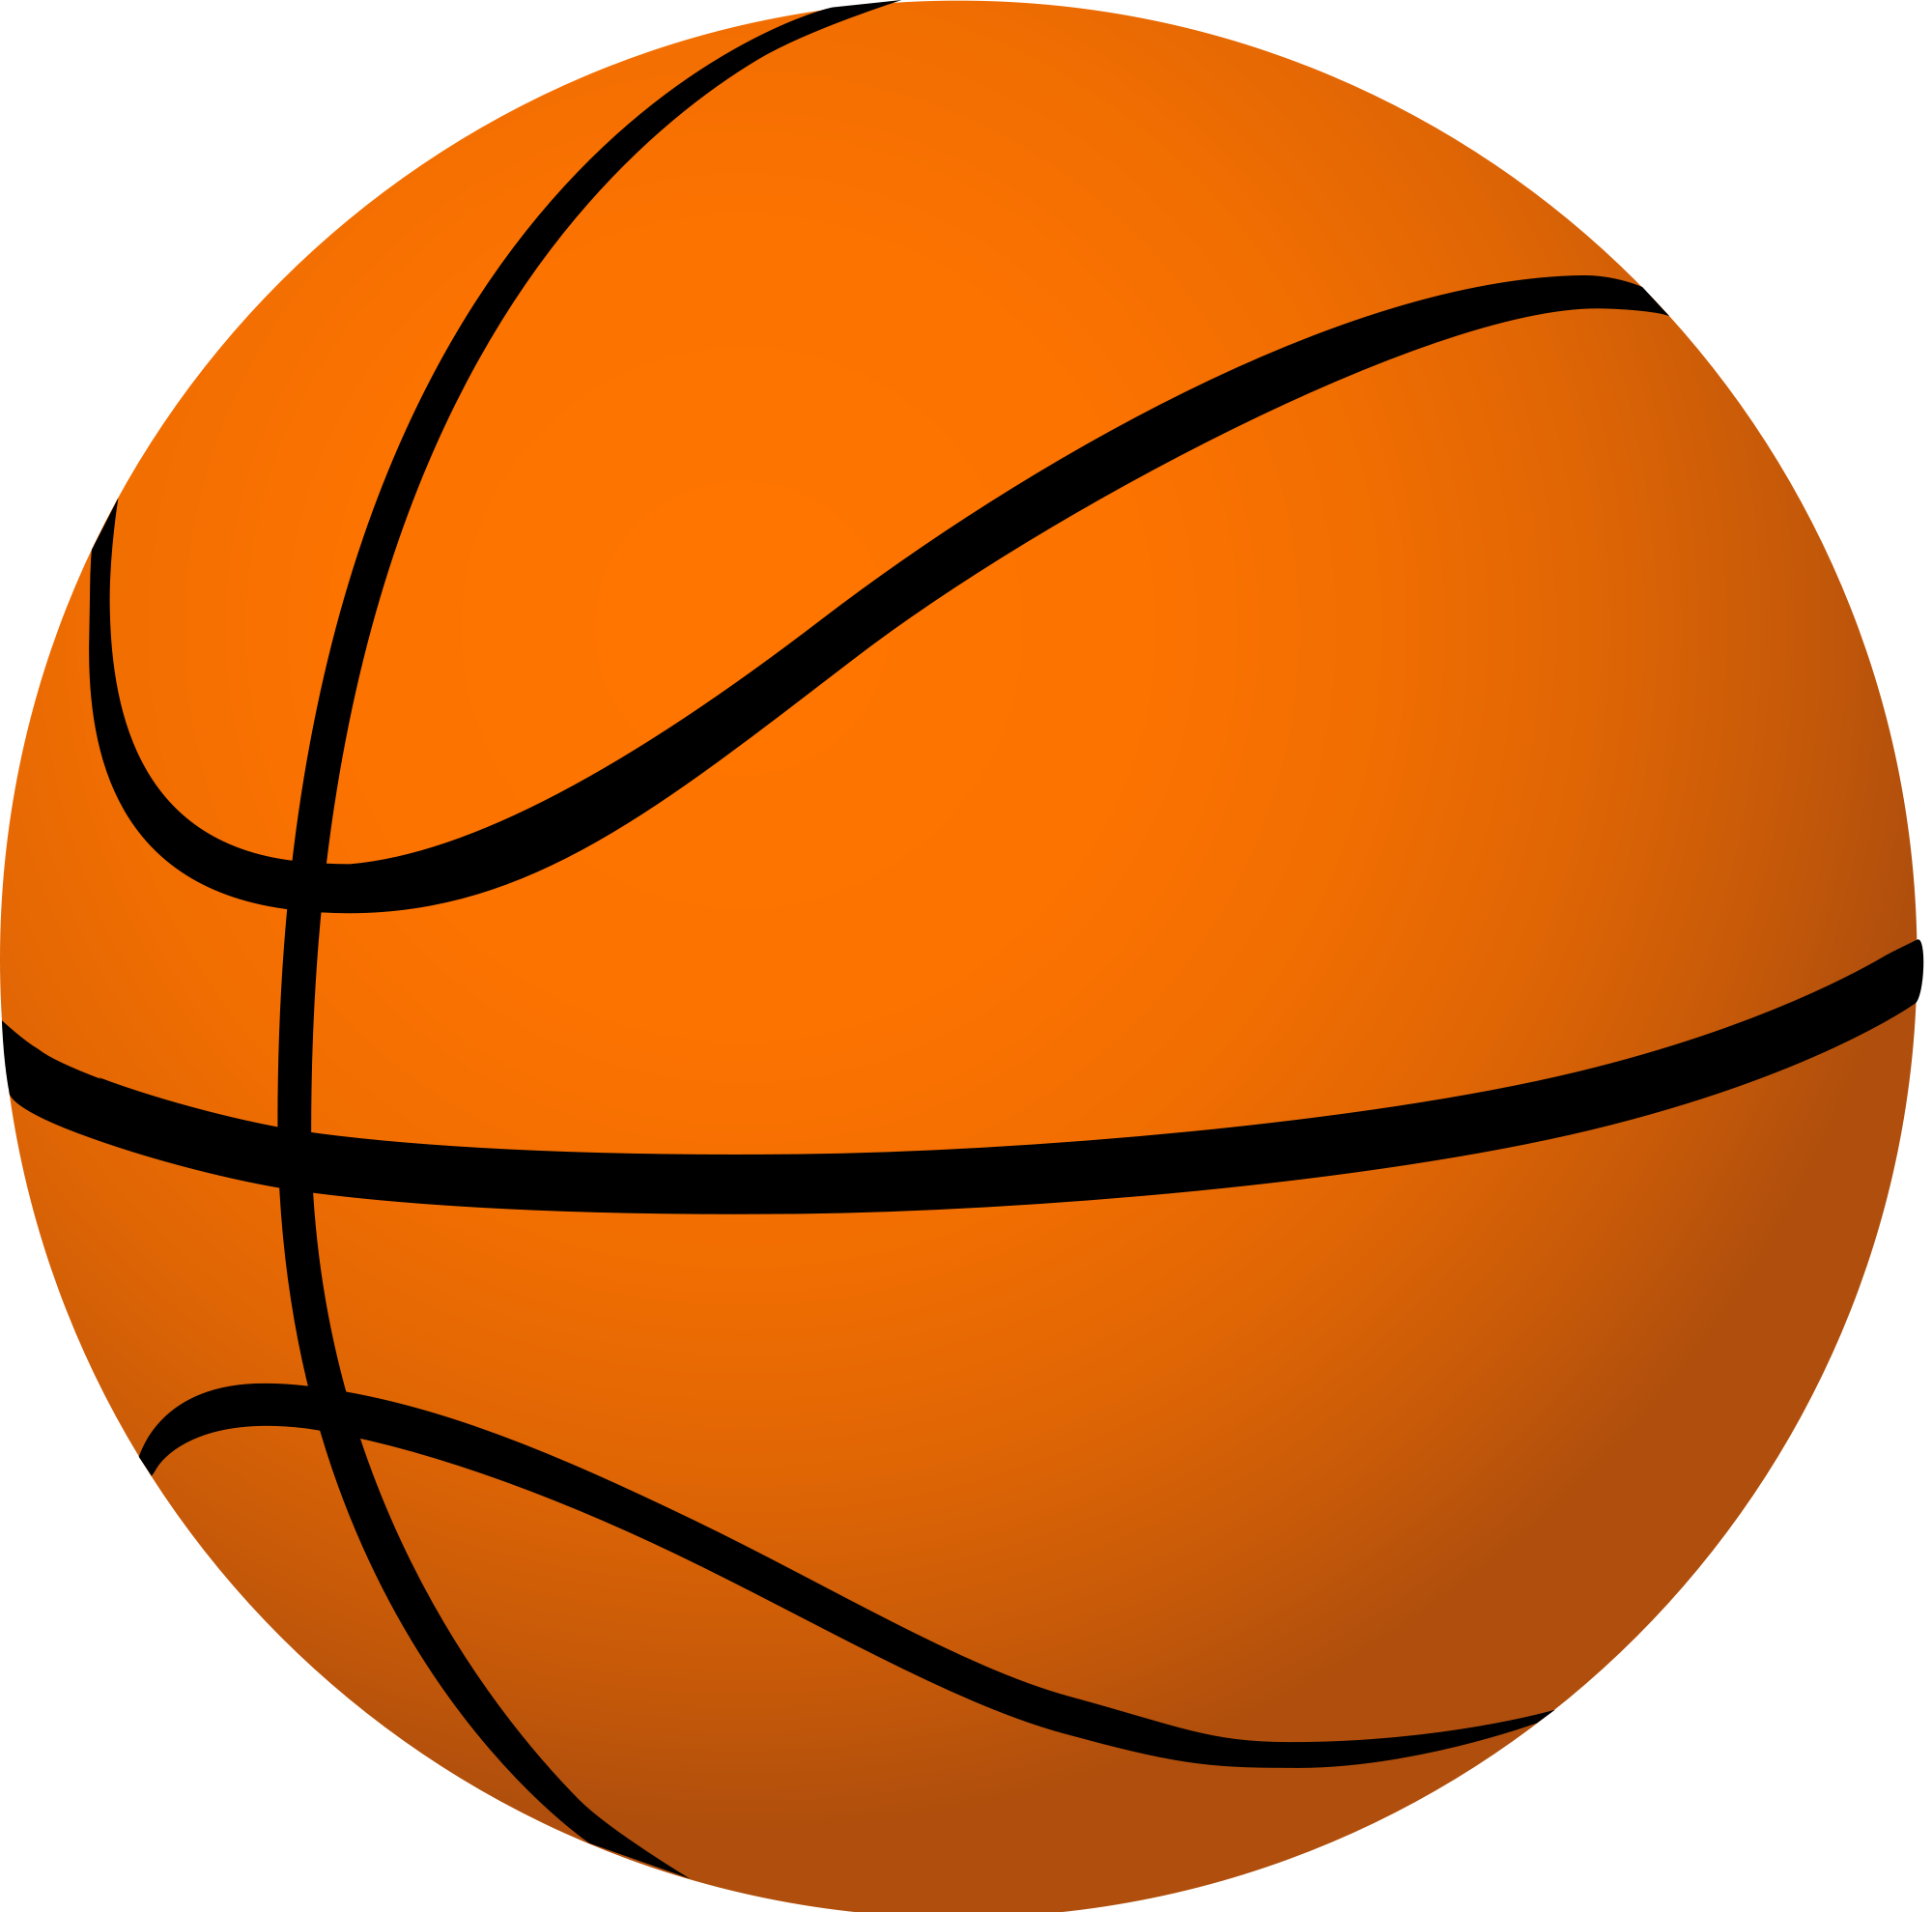 Basketball clipart free.